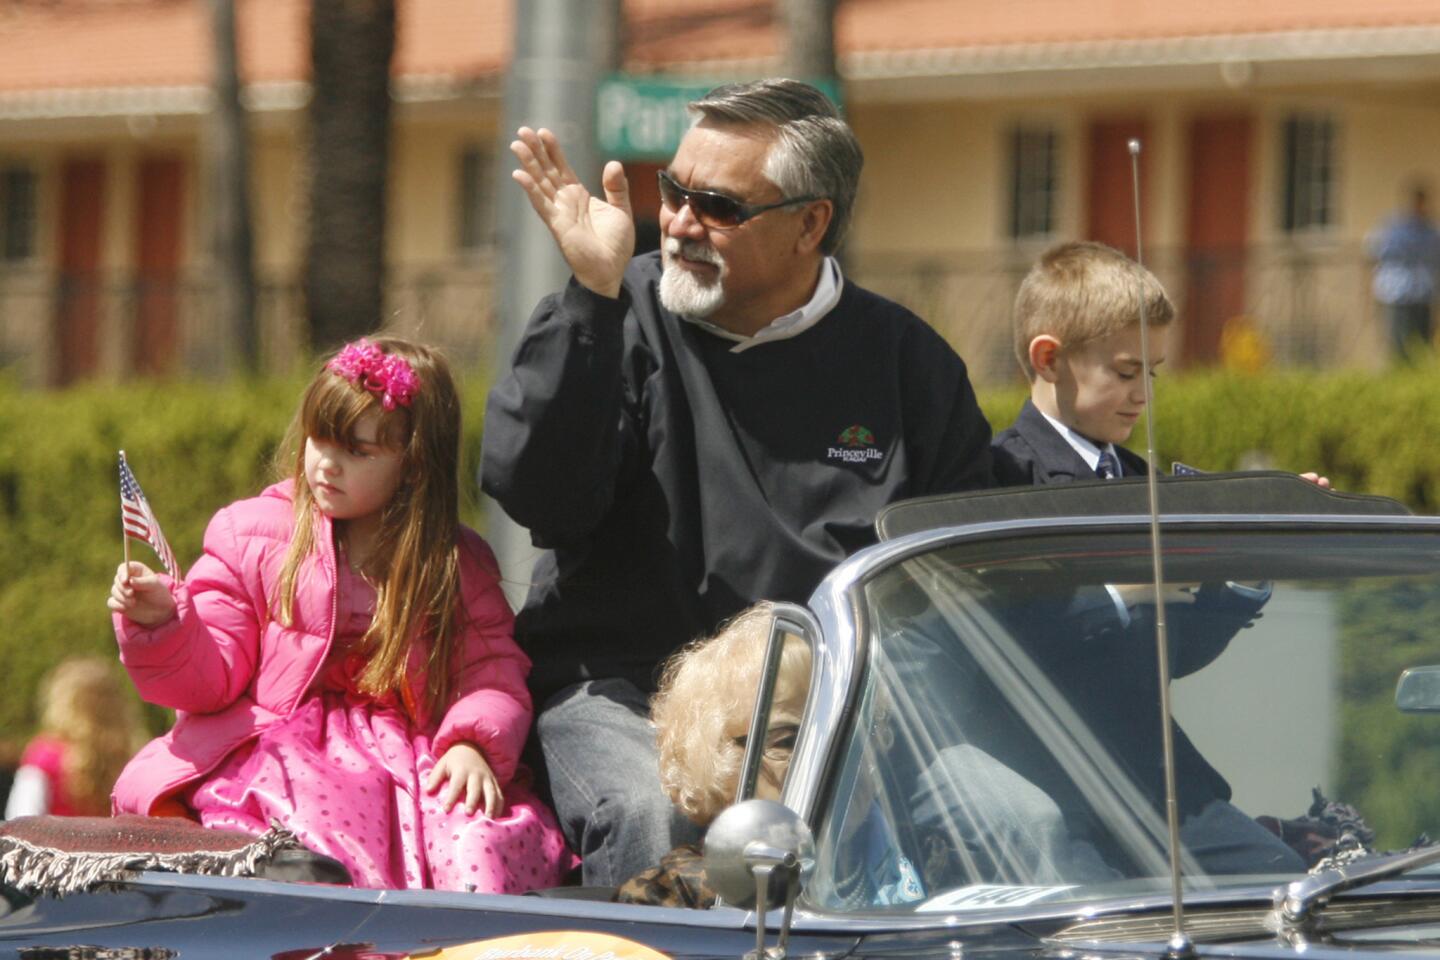 Mayor Jess Talamantes, center, waves to onlookers as he brings along his niece, Emma, 5, left, and his nephew, Joshua, 7, during Burbank on Parade, which took place on Olive Ave. between Keystone St. and Lomita St. on Saturday, April 14, 2012.